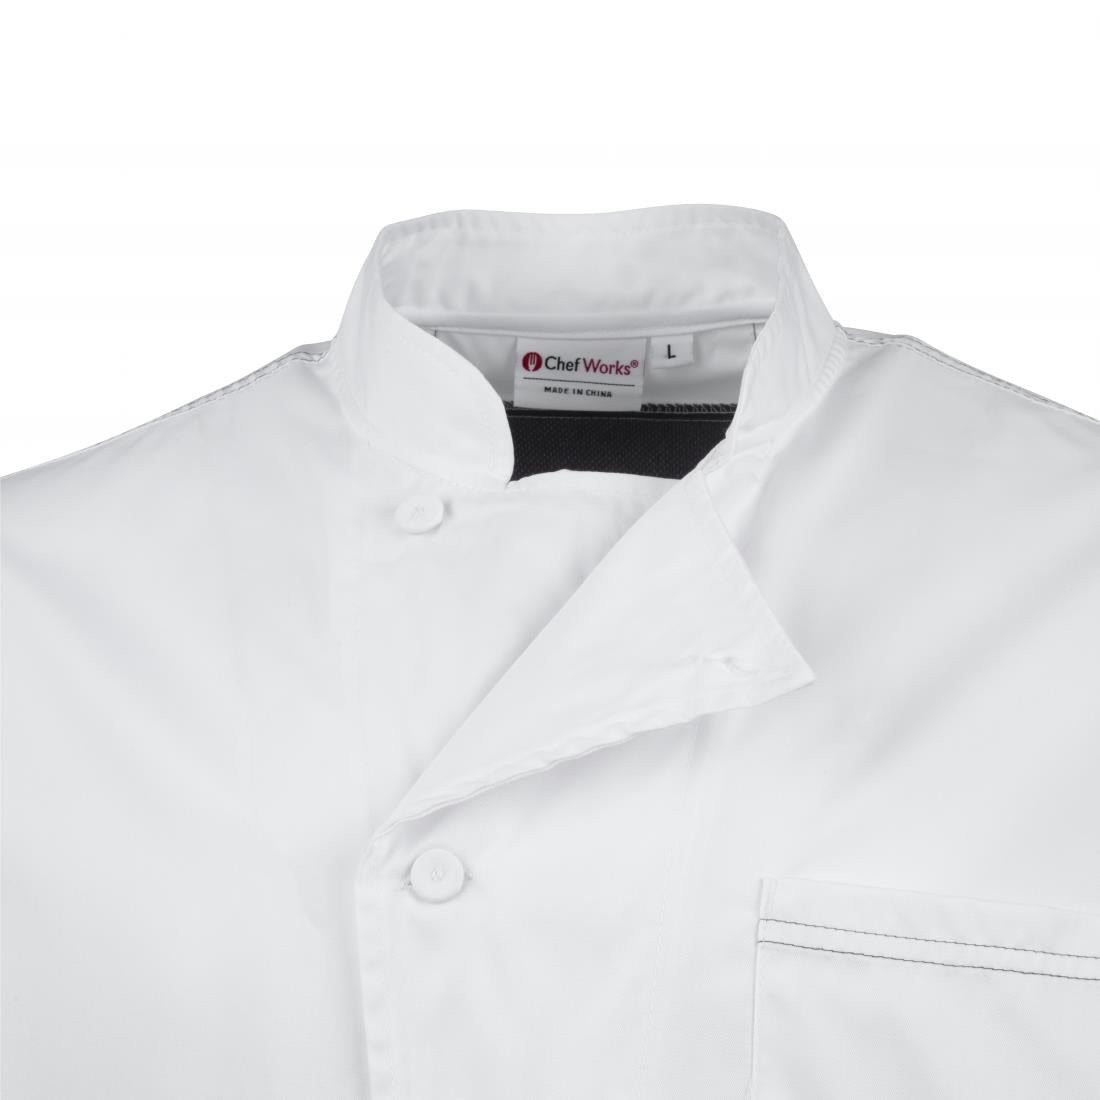 Chef Works Valais Unisex Chefs Jacket White with Grey 2XL JD Catering Equipment Solutions Ltd